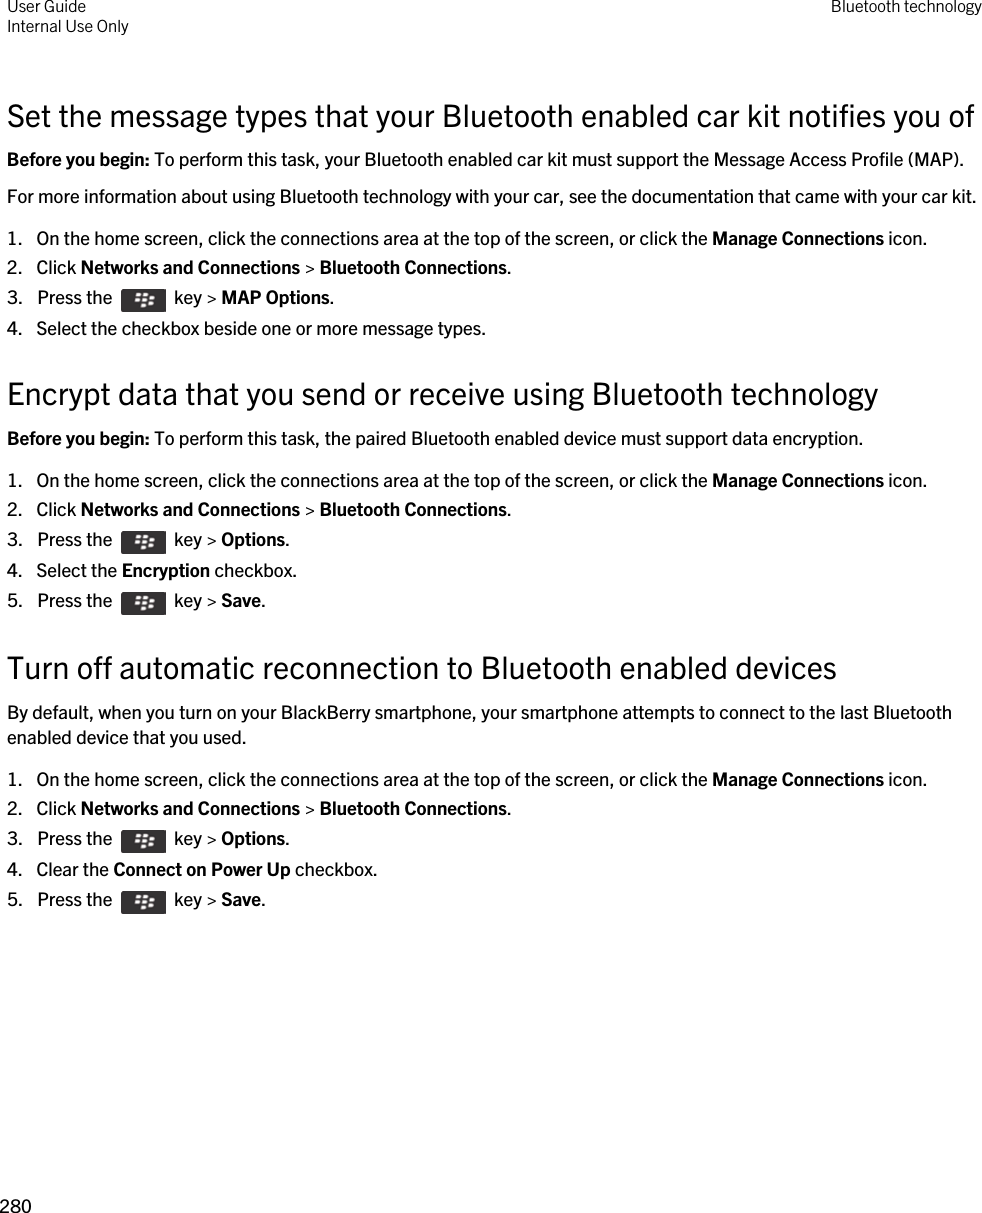 Set the message types that your Bluetooth enabled car kit notifies you ofBefore you begin: To perform this task, your Bluetooth enabled car kit must support the Message Access Profile (MAP).For more information about using Bluetooth technology with your car, see the documentation that came with your car kit.1. On the home screen, click the connections area at the top of the screen, or click the Manage Connections icon.2. Click Networks and Connections &gt; Bluetooth Connections.3.  Press the    key &gt; MAP Options. 4. Select the checkbox beside one or more message types.Encrypt data that you send or receive using Bluetooth technologyBefore you begin: To perform this task, the paired Bluetooth enabled device must support data encryption.1. On the home screen, click the connections area at the top of the screen, or click the Manage Connections icon.2. Click Networks and Connections &gt; Bluetooth Connections.3.  Press the    key &gt; Options. 4. Select the Encryption checkbox.5.  Press the    key &gt; Save. Turn off automatic reconnection to Bluetooth enabled devicesBy default, when you turn on your BlackBerry smartphone, your smartphone attempts to connect to the last Bluetooth enabled device that you used.1. On the home screen, click the connections area at the top of the screen, or click the Manage Connections icon.2. Click Networks and Connections &gt; Bluetooth Connections.3.  Press the    key &gt; Options. 4. Clear the Connect on Power Up checkbox.5.  Press the    key &gt; Save. User GuideInternal Use Only Bluetooth technology280 